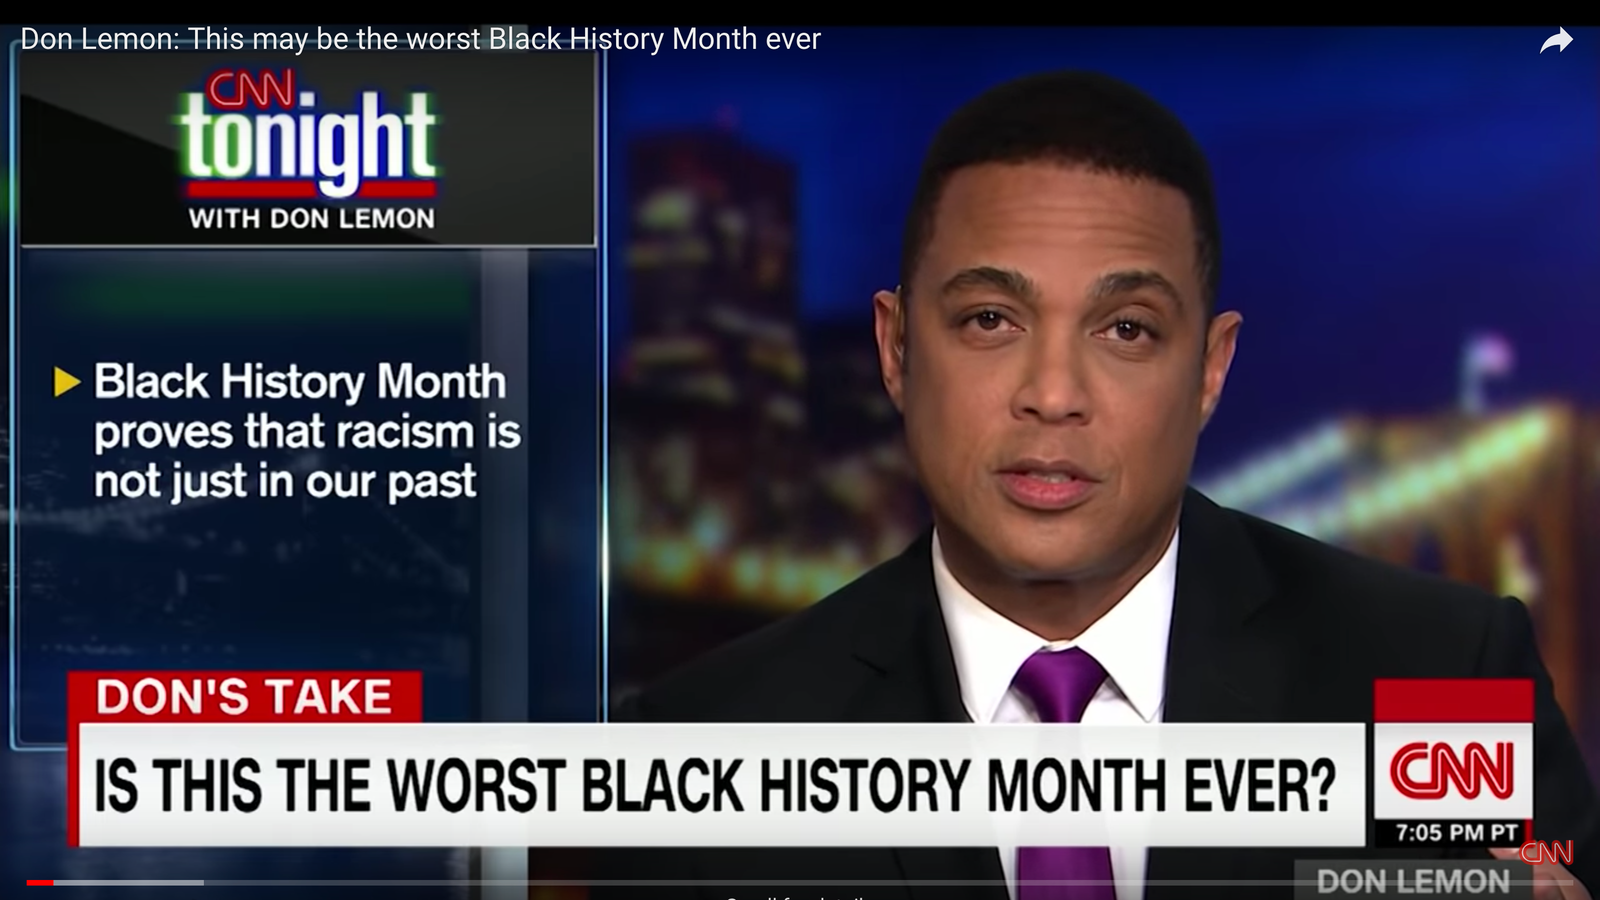 Don Lemon Says This Was the Worst Black History Month Ever1600 x 900